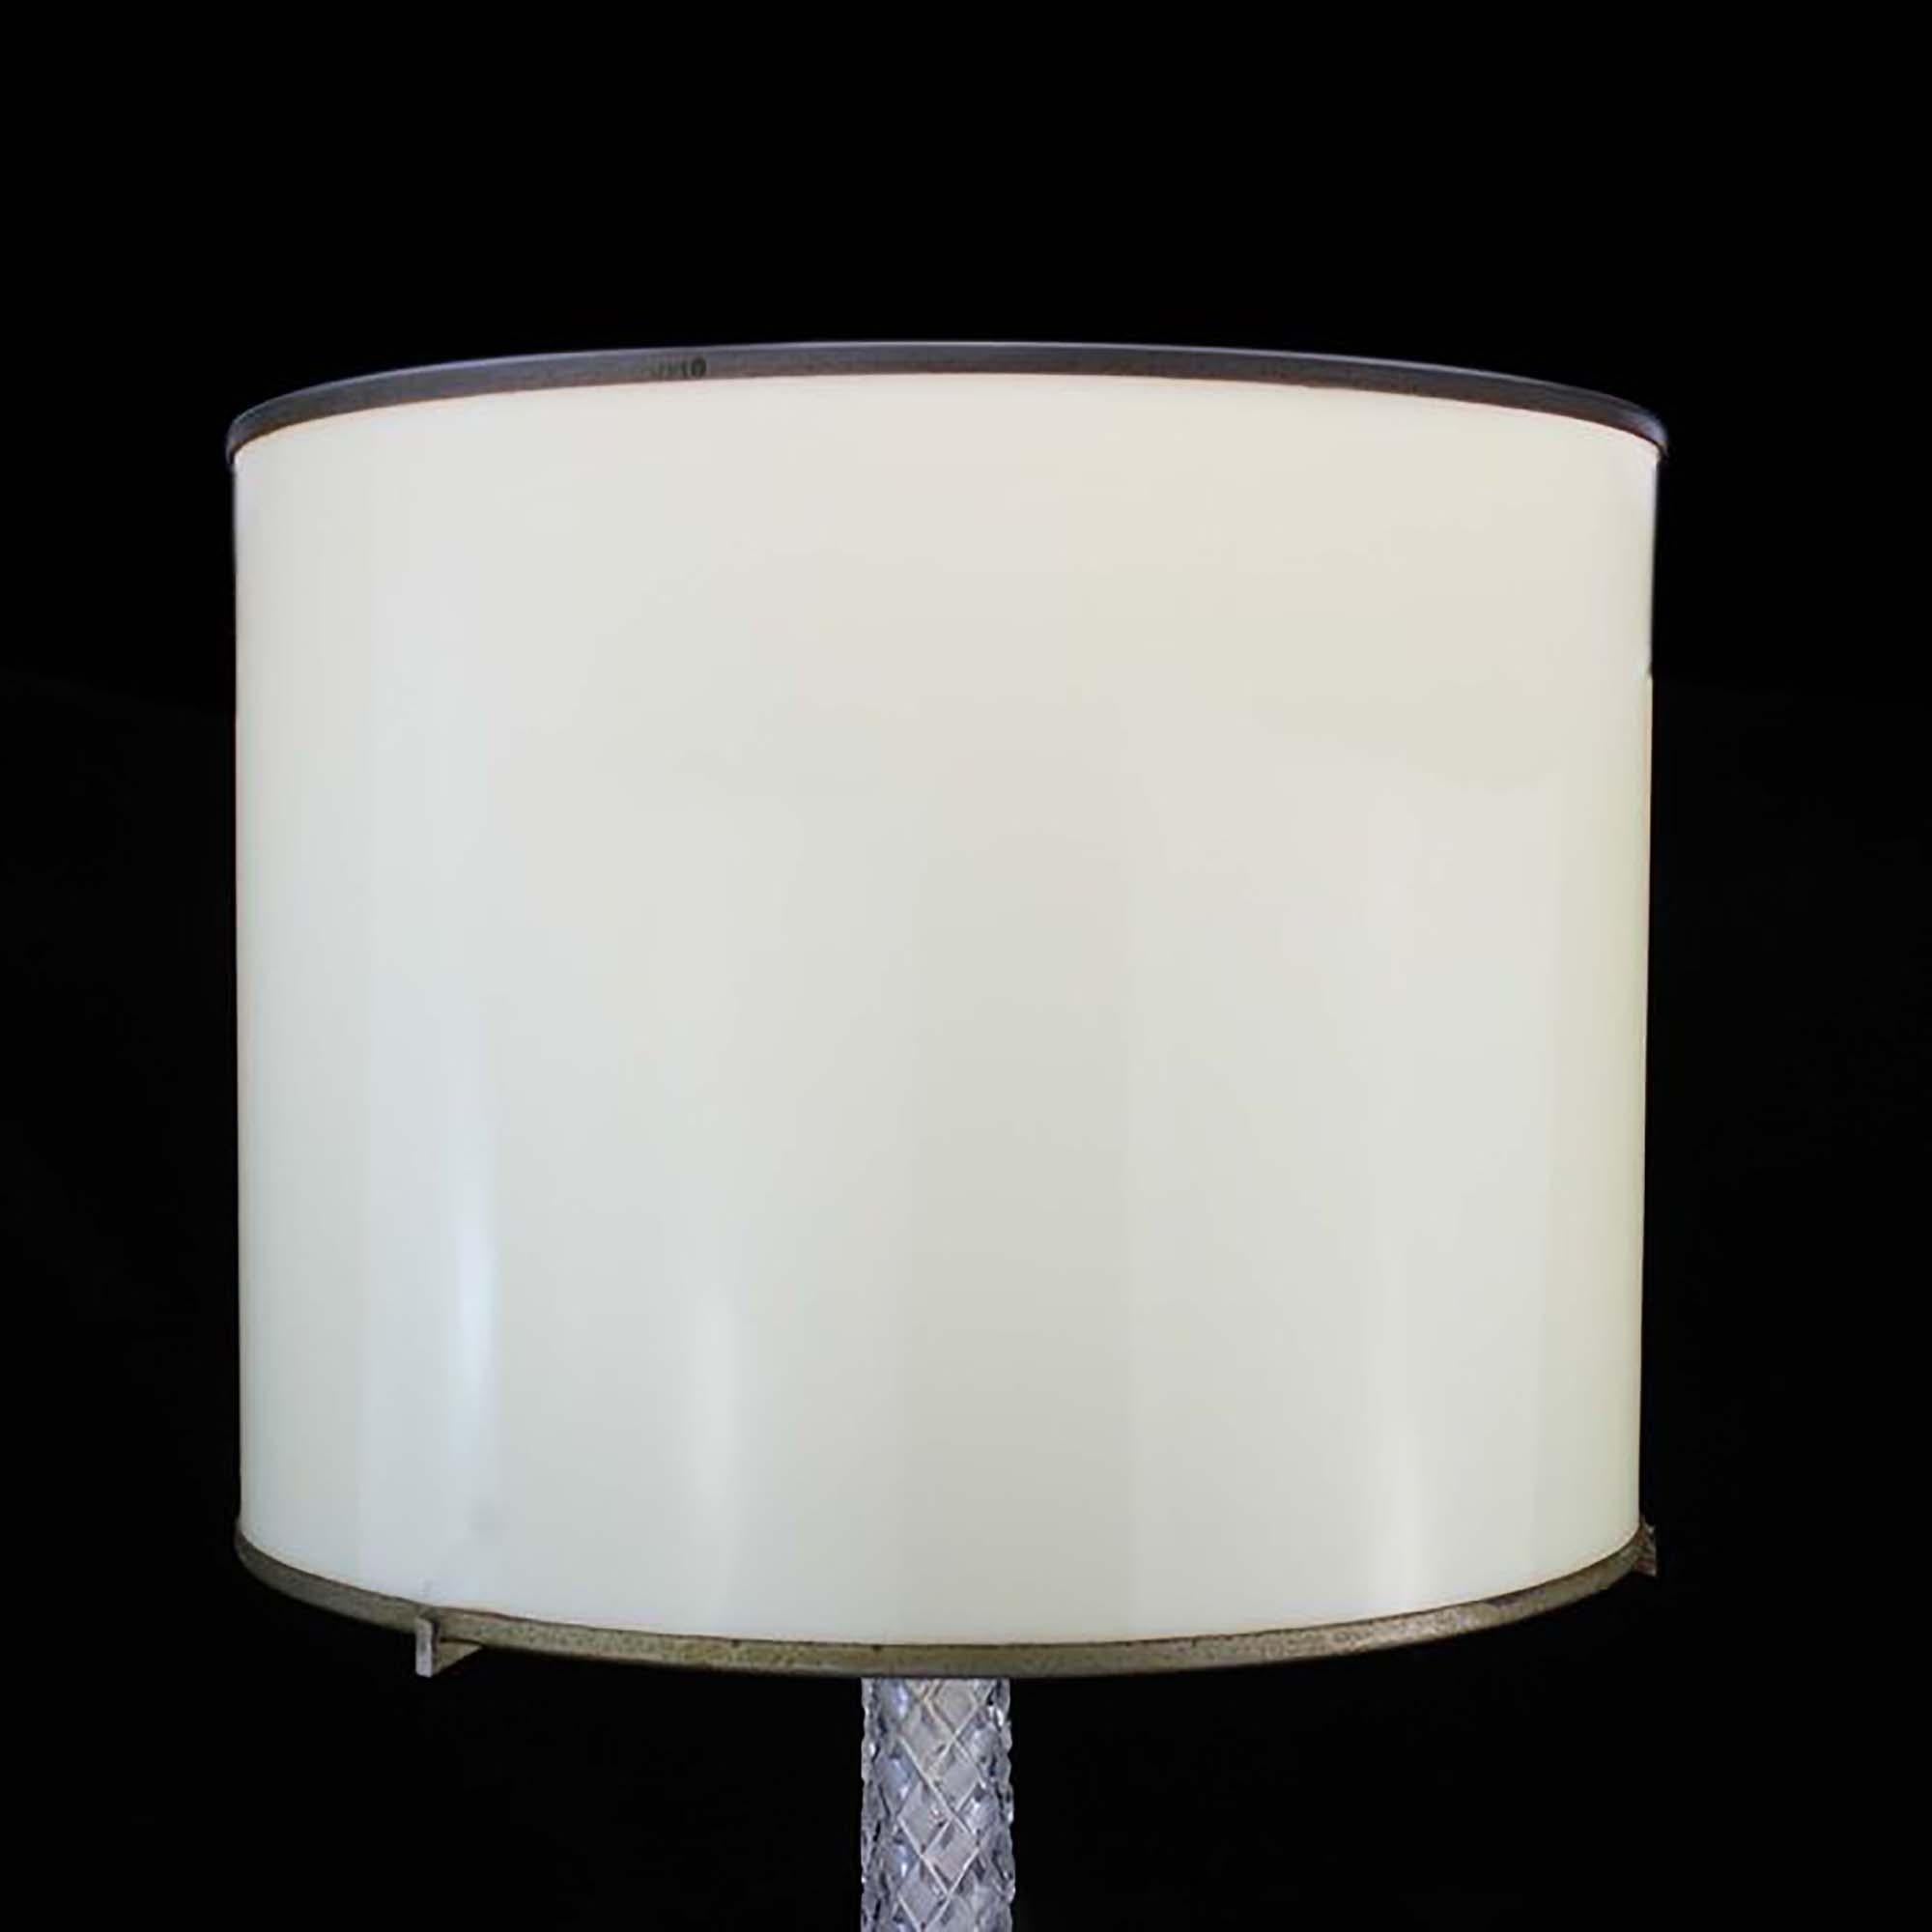 Vintage silver plated, steel and crystal table lamp
Made in England, Ca.1960's
Silver plate maker: William Padley & Son Ltd 

Dimensions: 
Diameter x height: 30 x 54 cm 
Approx Weight: 2 KG 

Condition: Lamp is general used, crystal is